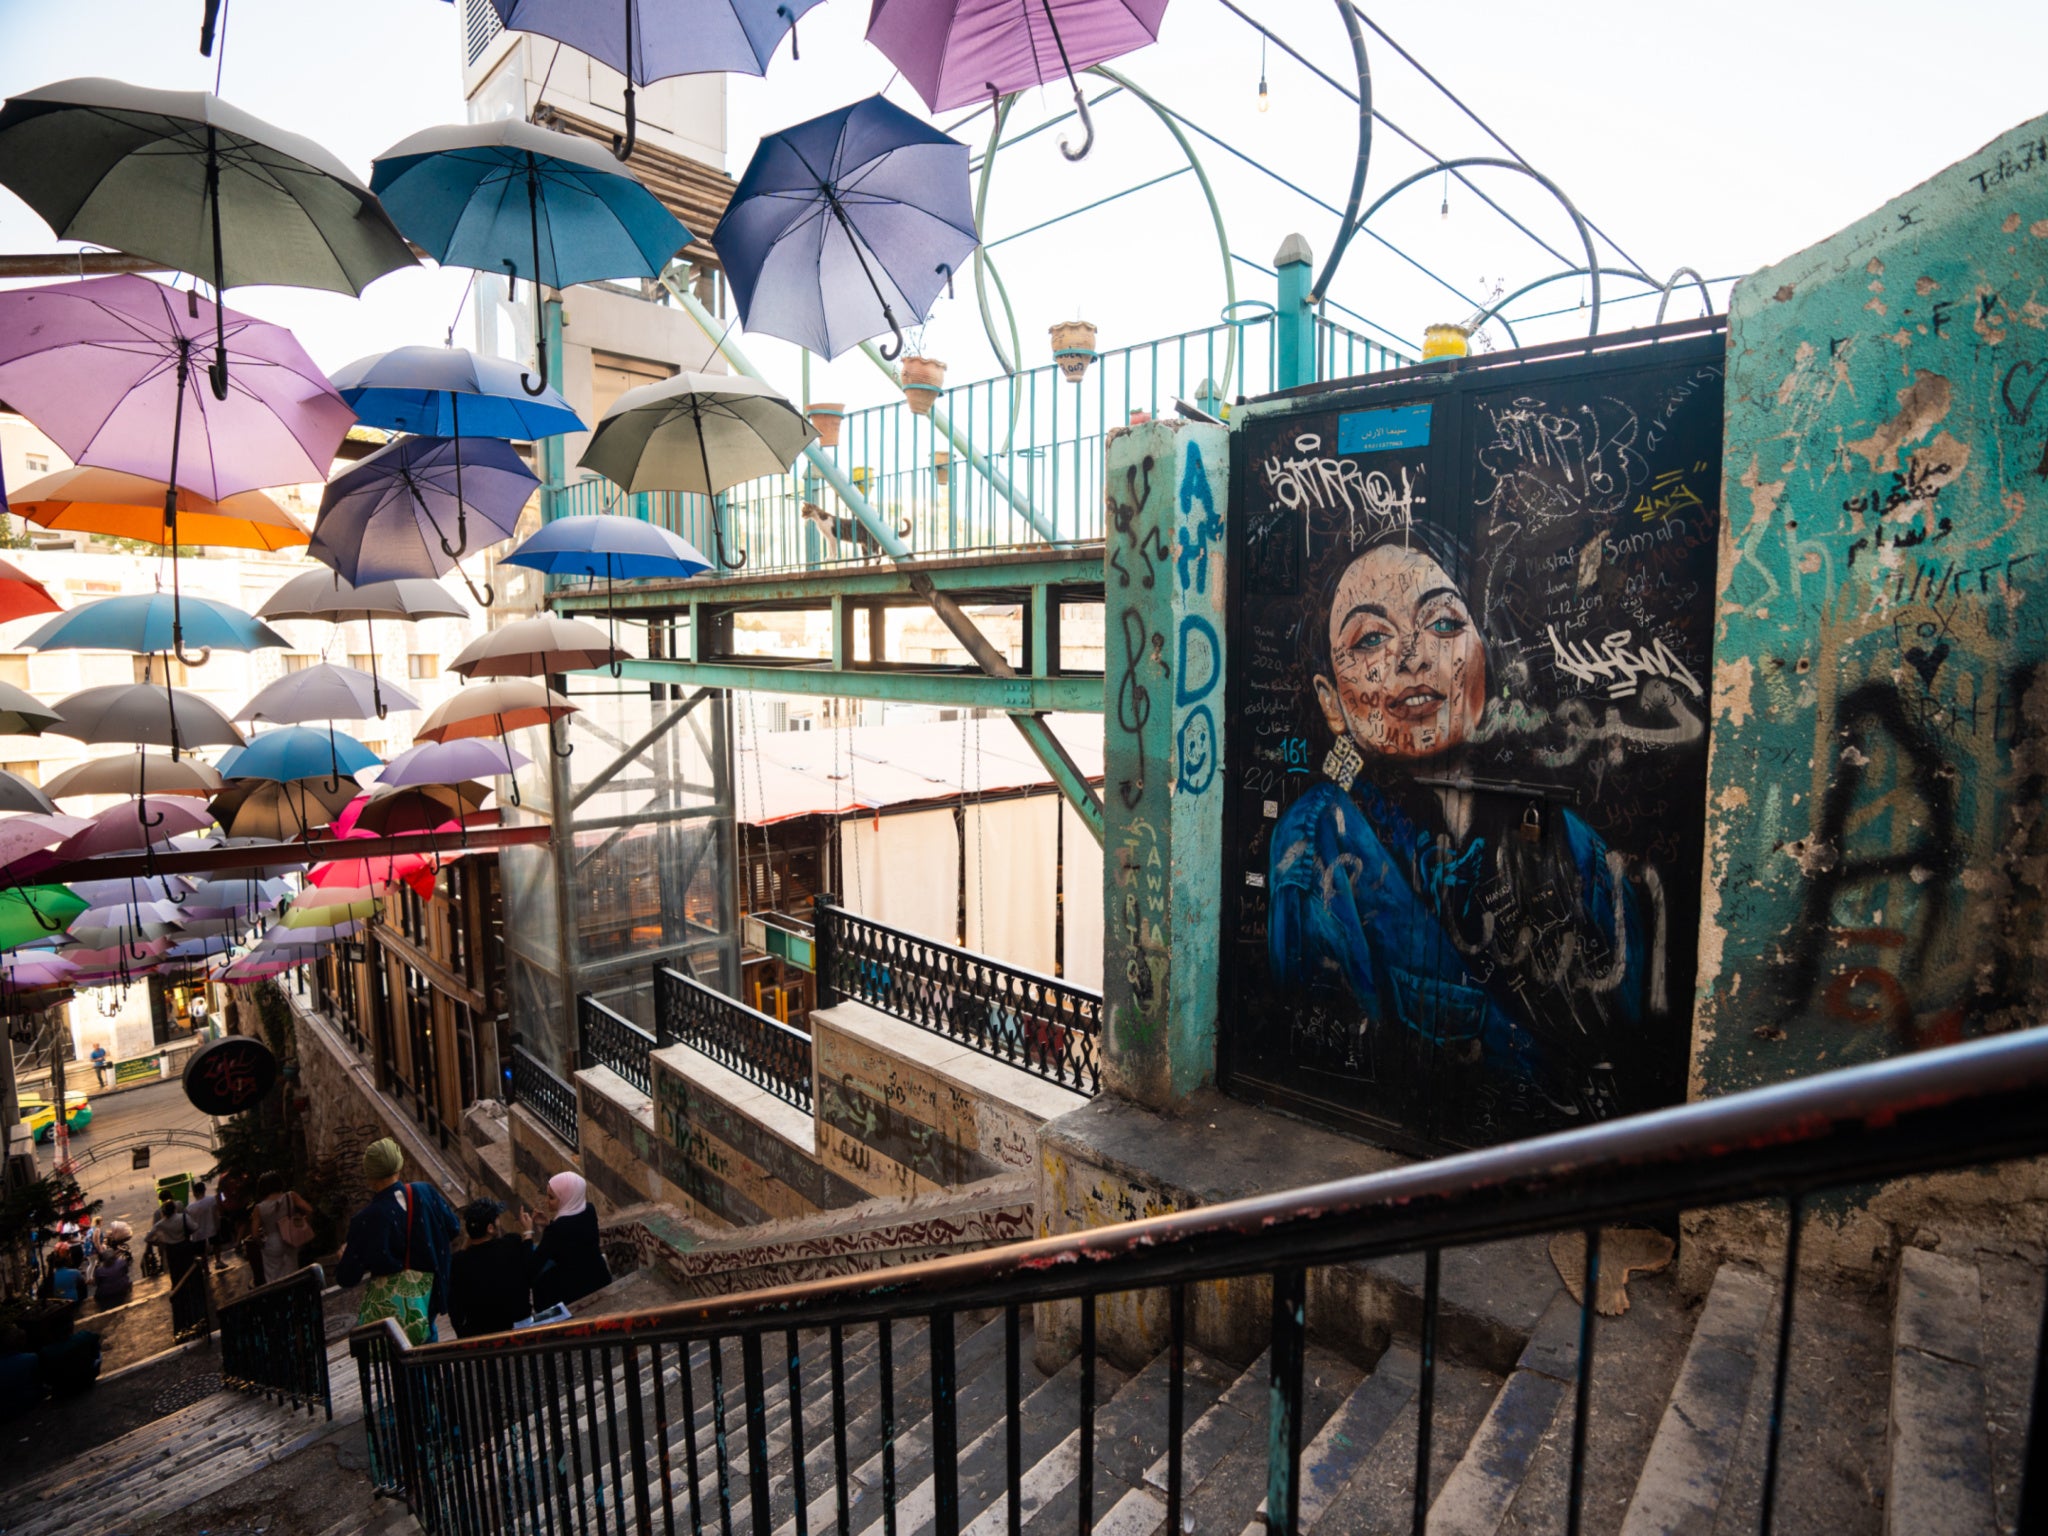 The Al-Kalha Stairs are surrounded by murals and street art